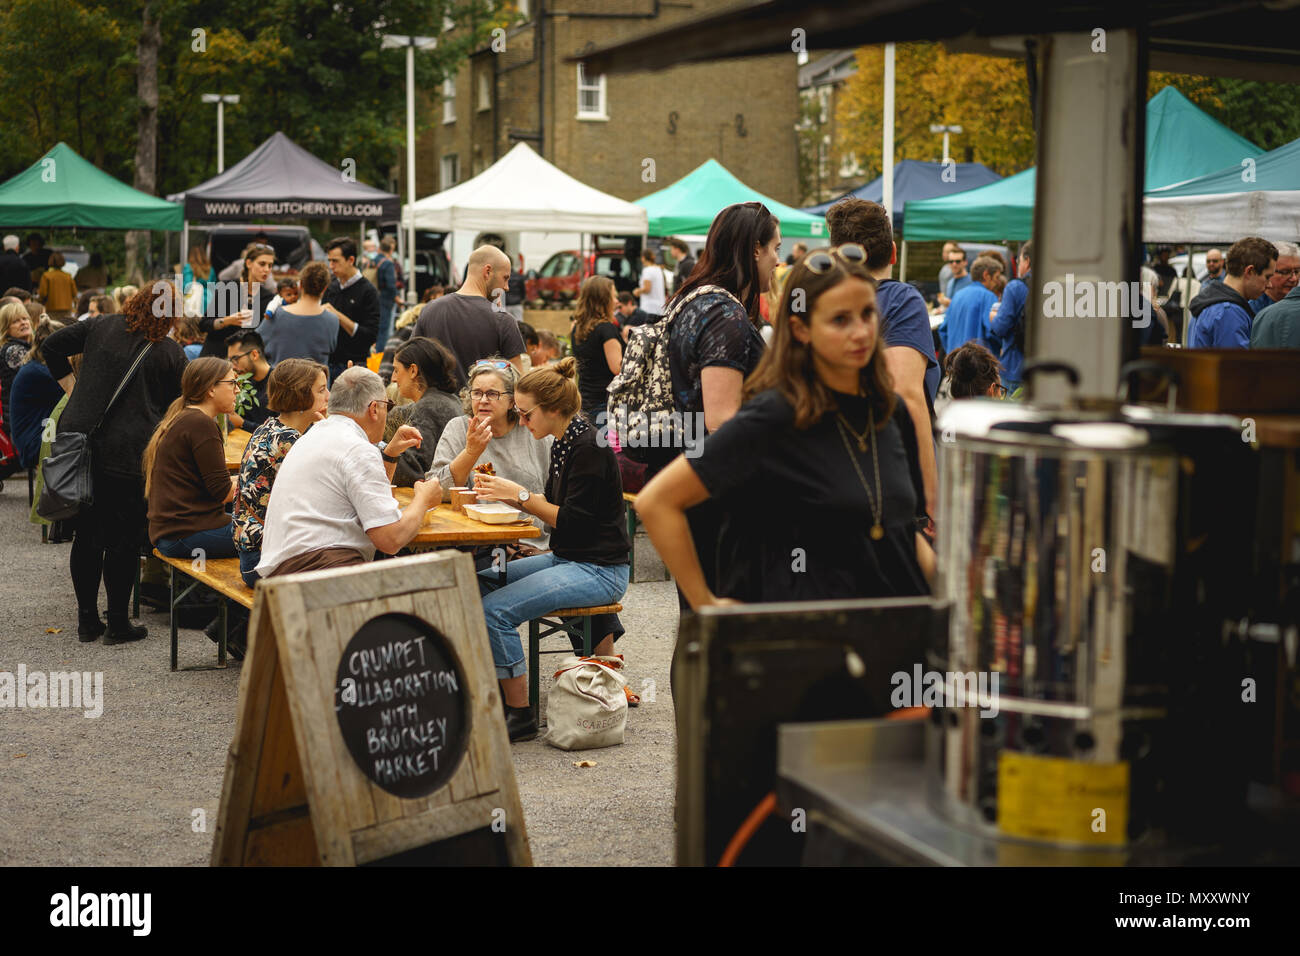 London, UK - October 2017. People shopping at Brockley Market, a local farmer's market held every Saturday in Lewisham. Landscape format. Stock Photo